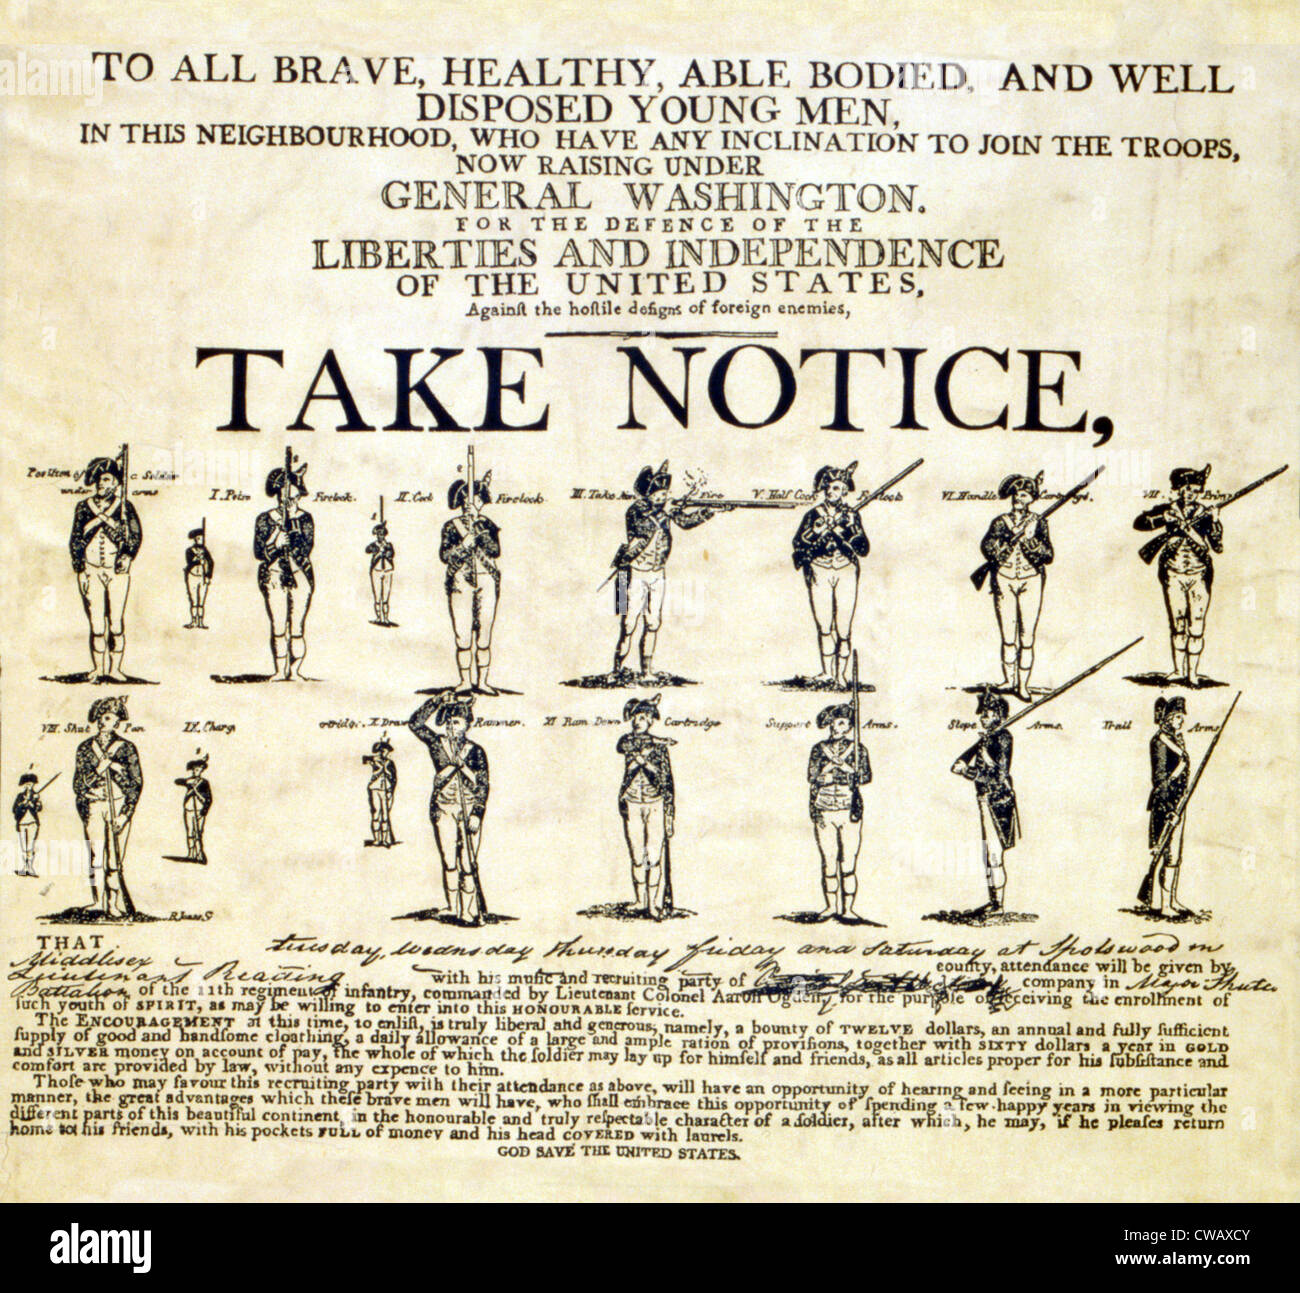 Continental Army recruitment broadside. 'To all brave, healthy, able bodied, and well disposed young men...' 1776. Stock Photo